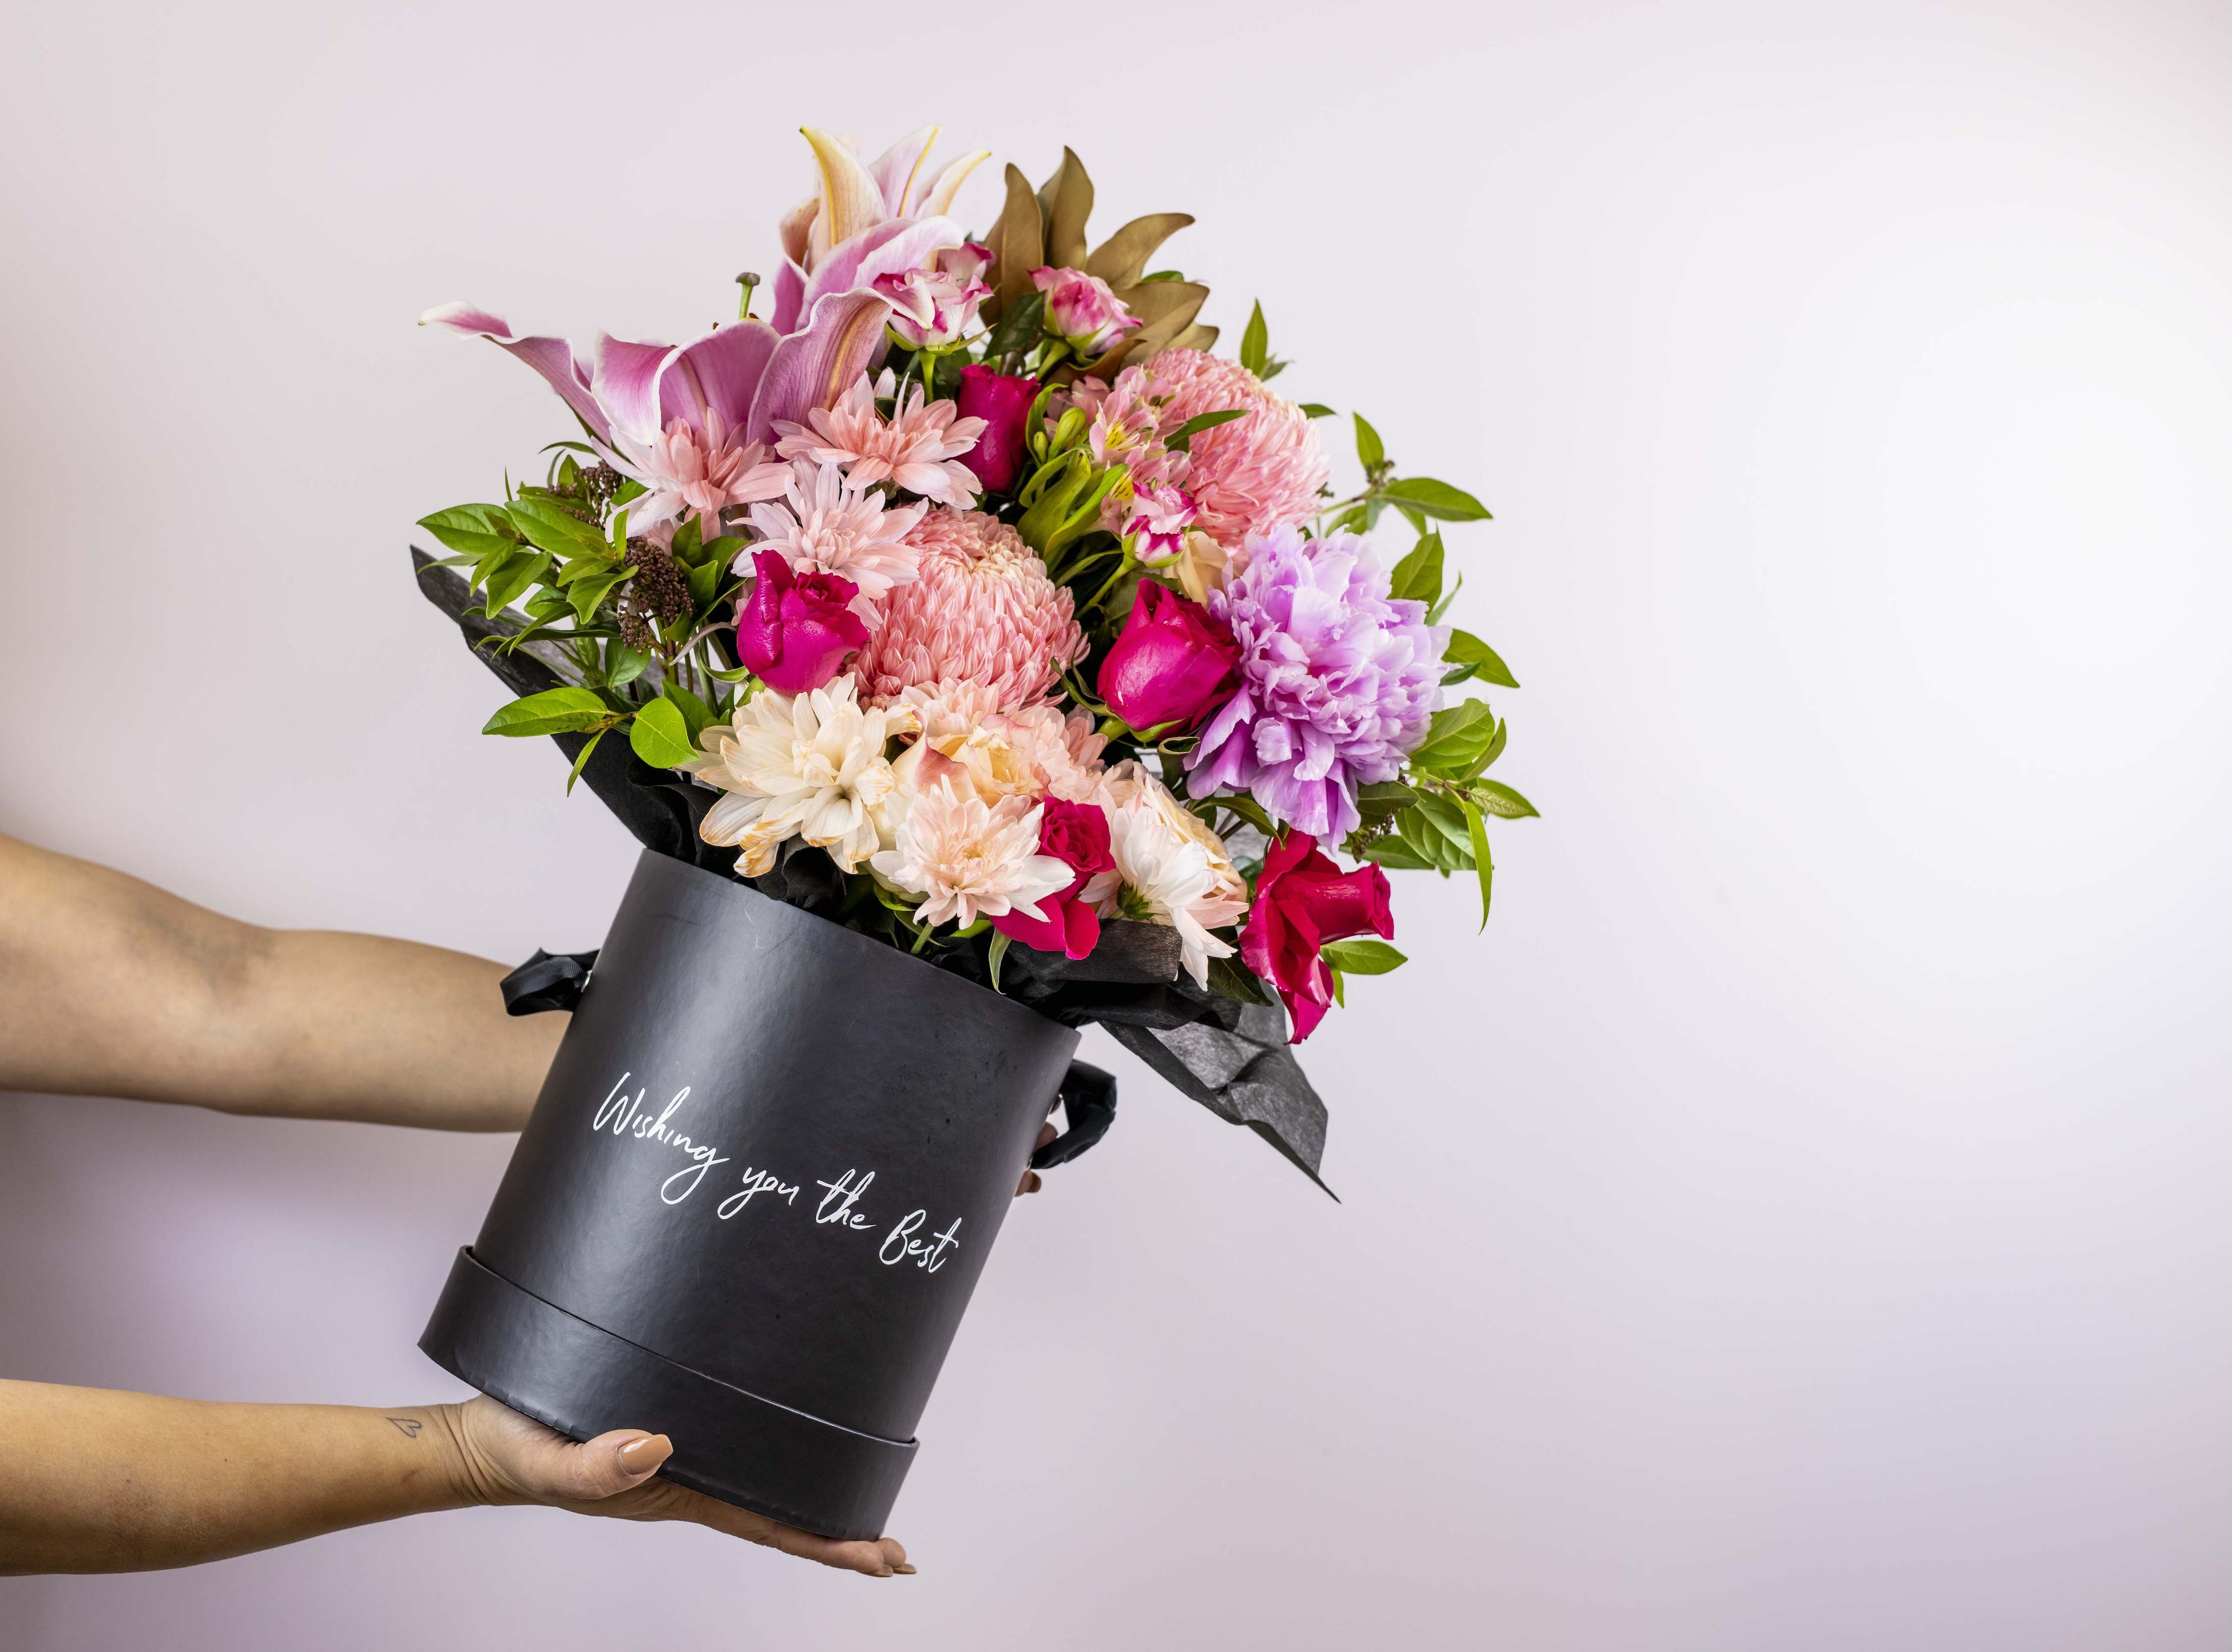 The Flower Boutique, Perth Flower Delivery, Florist